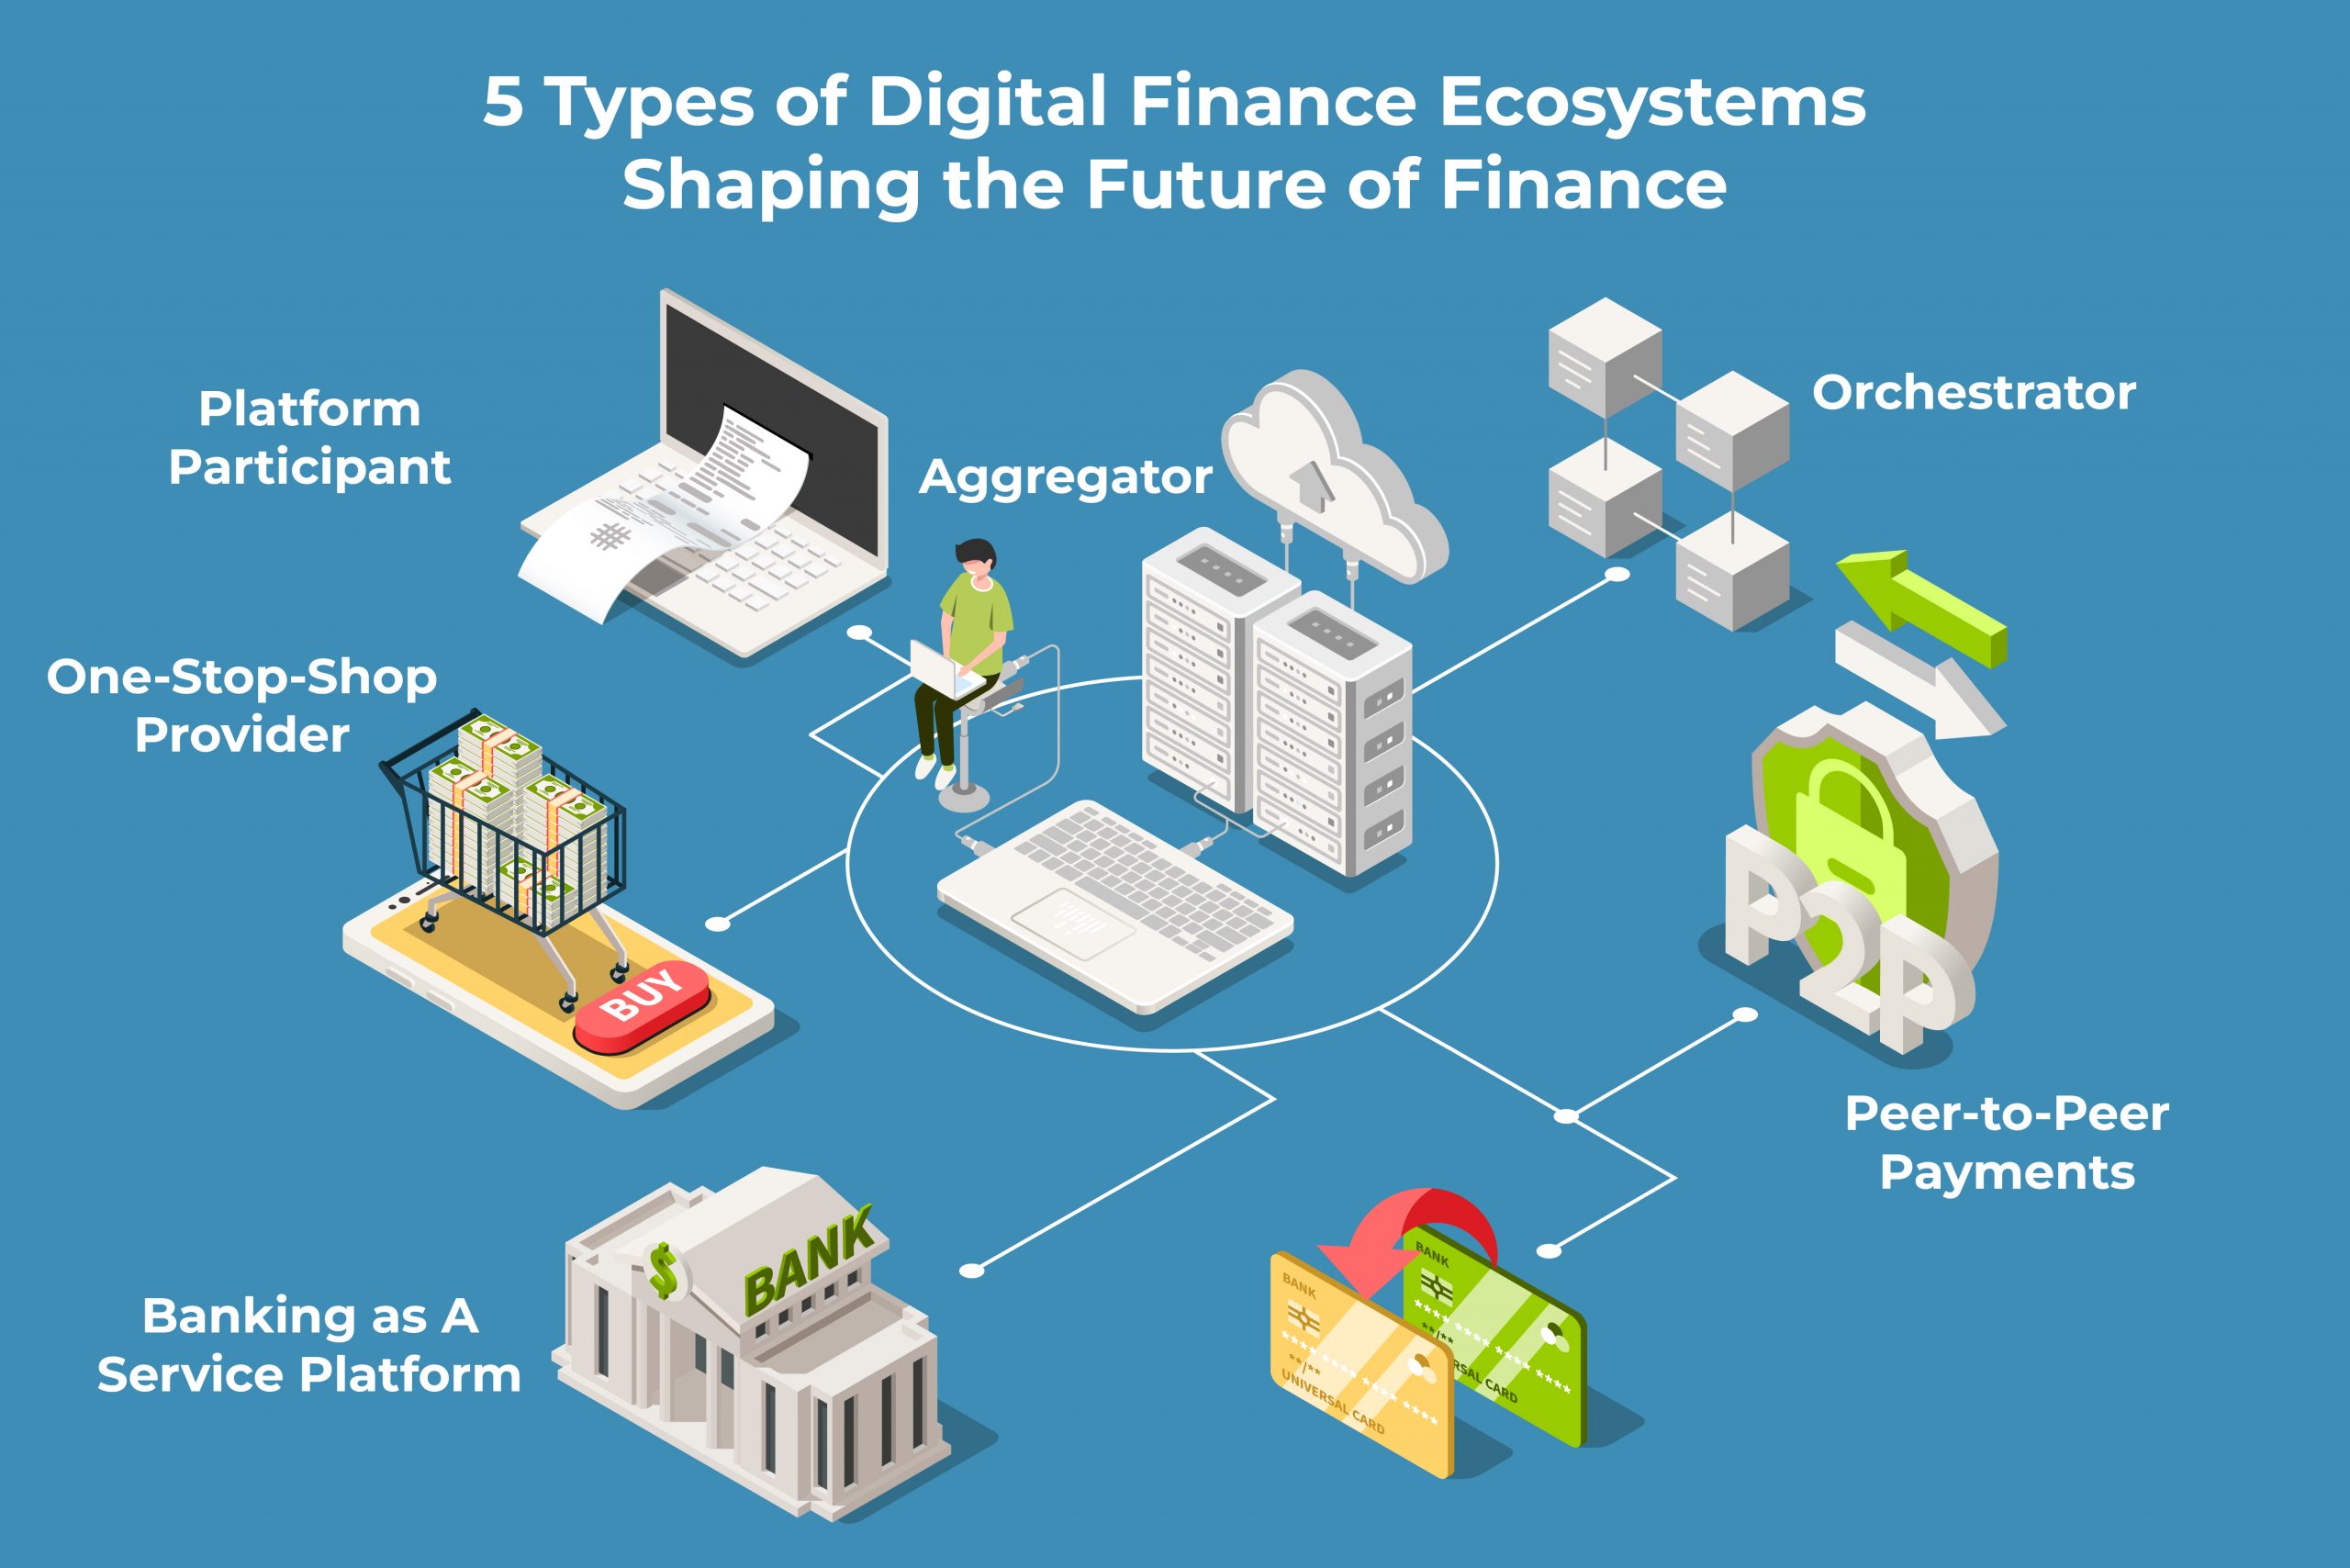 5 types of digital finance ecosystems shaping the future of finance